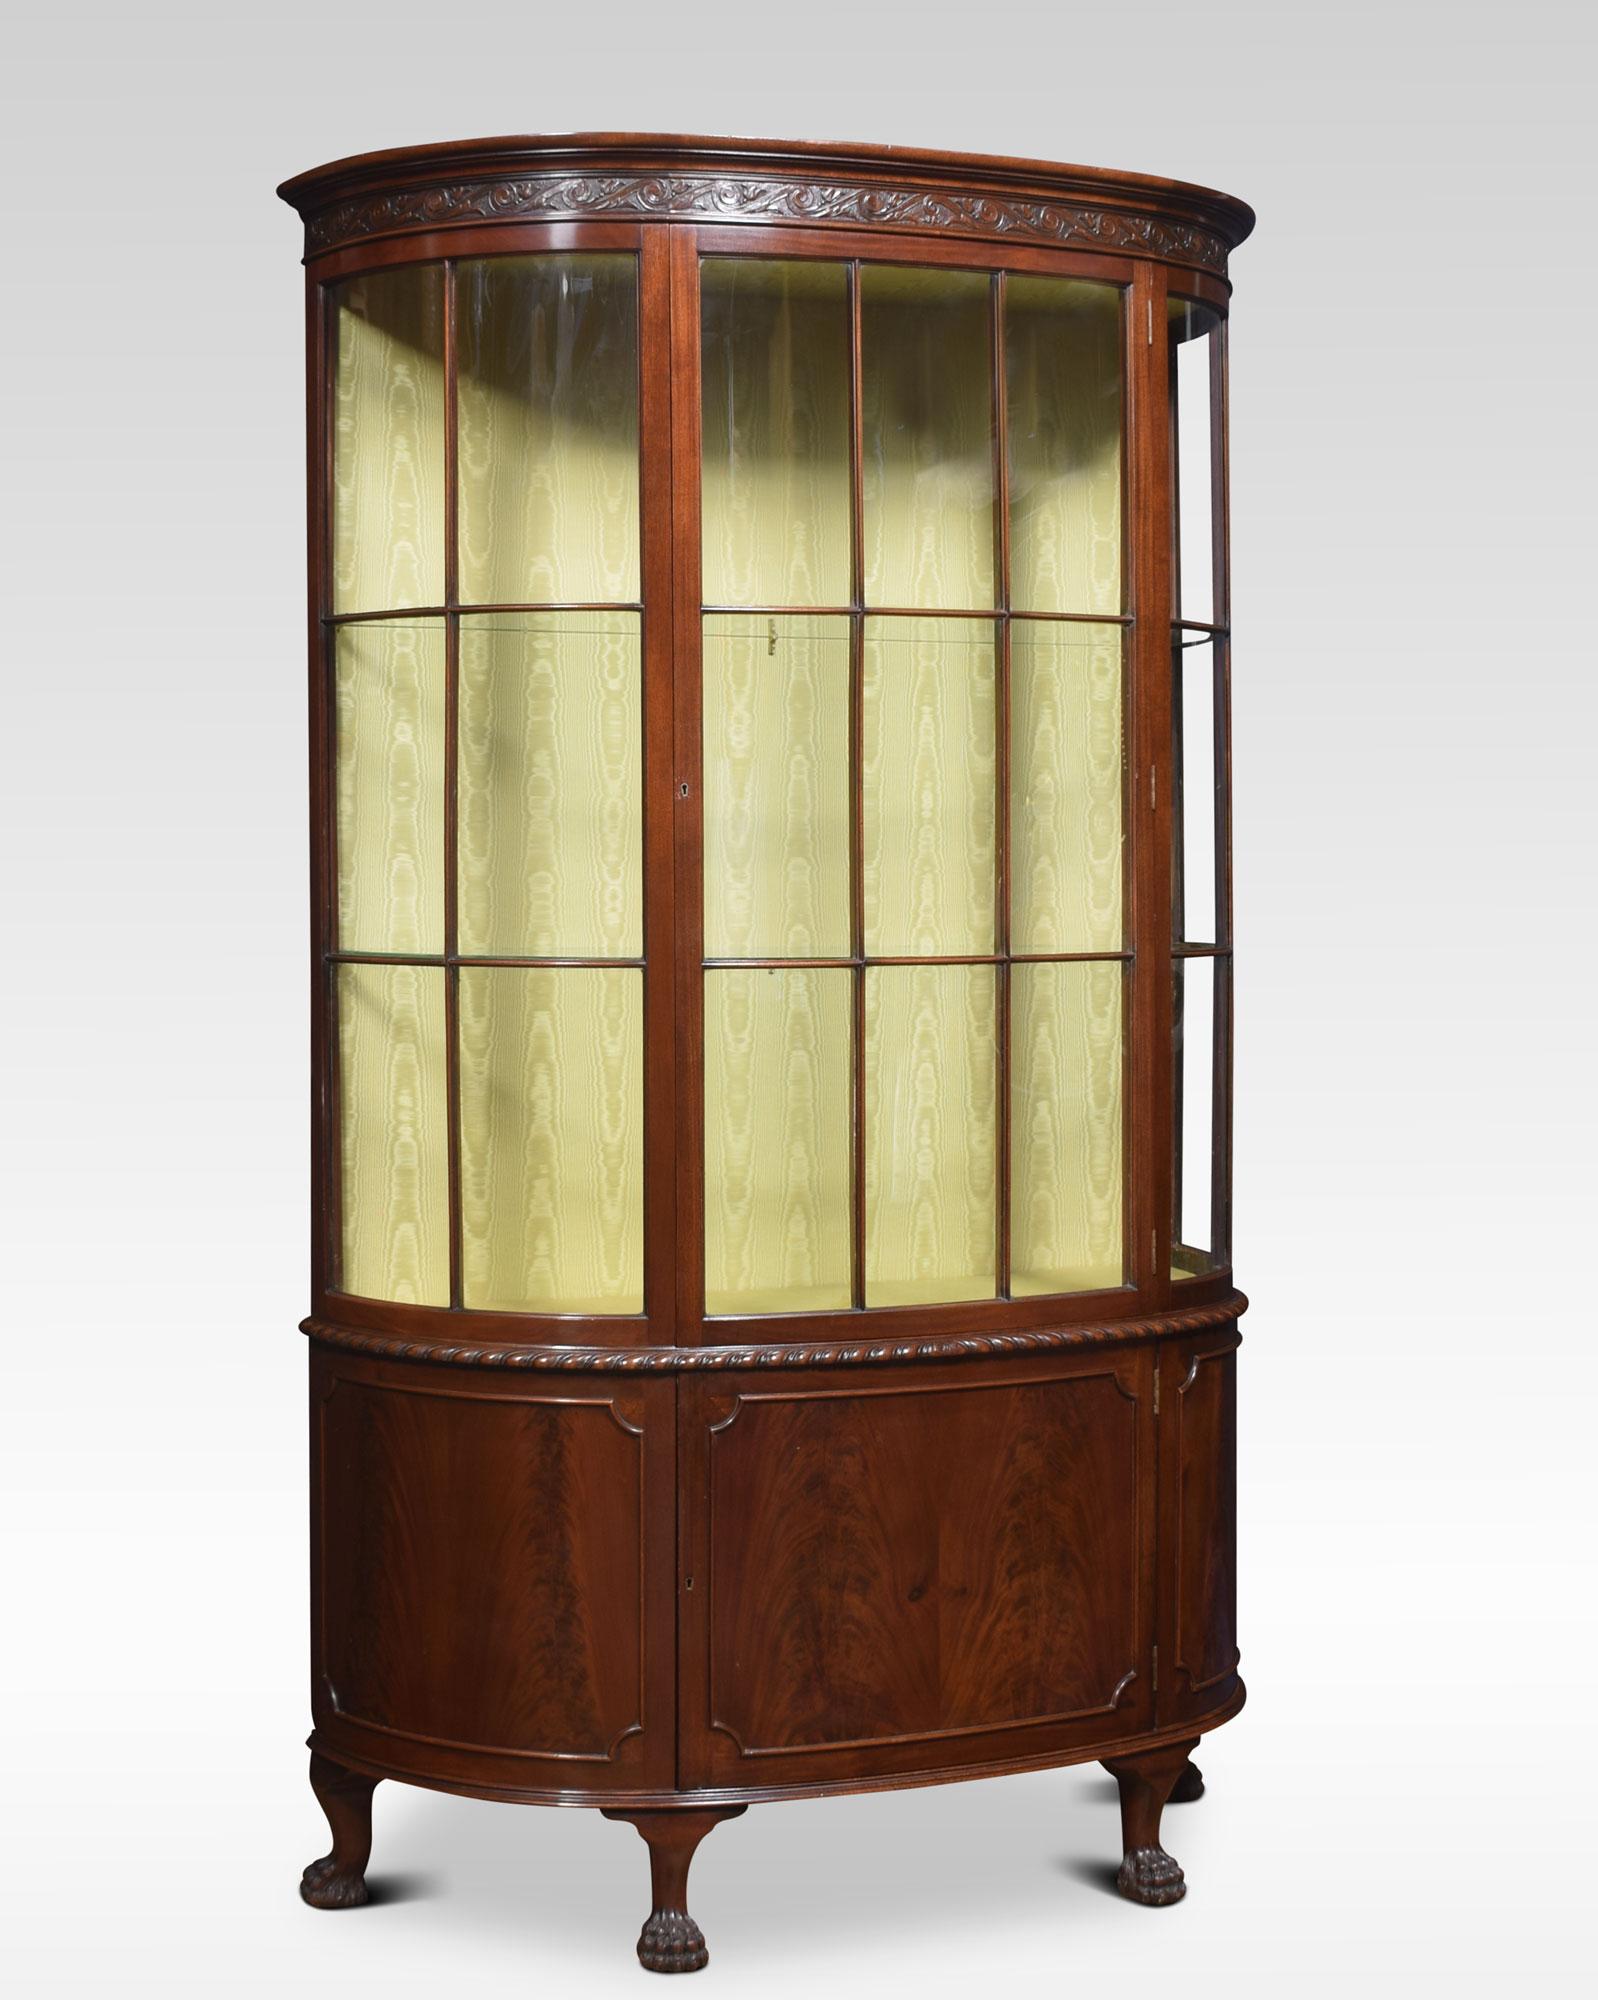 Early 20th century mahogany bow fronted display cabinet, having moulded cornice, above large glazed door opening to reveal watermark silk upholstered interior and two glazed shelves. The base section fitted with a central cupboard door. All raised